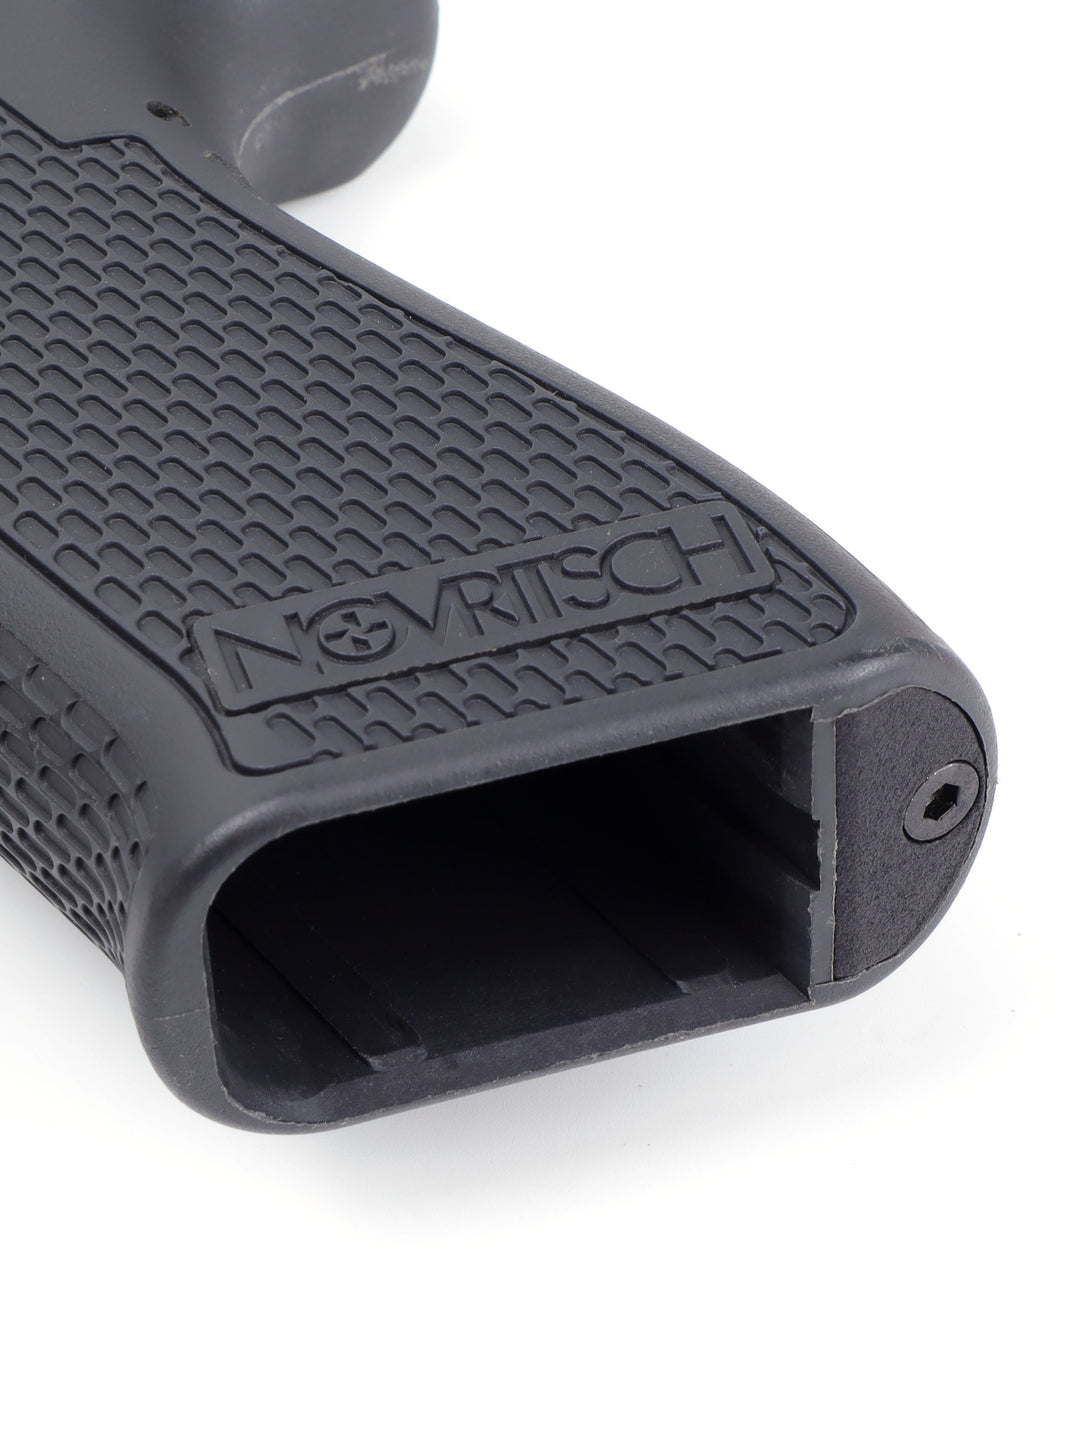 SSP18 Grip Dust Cover